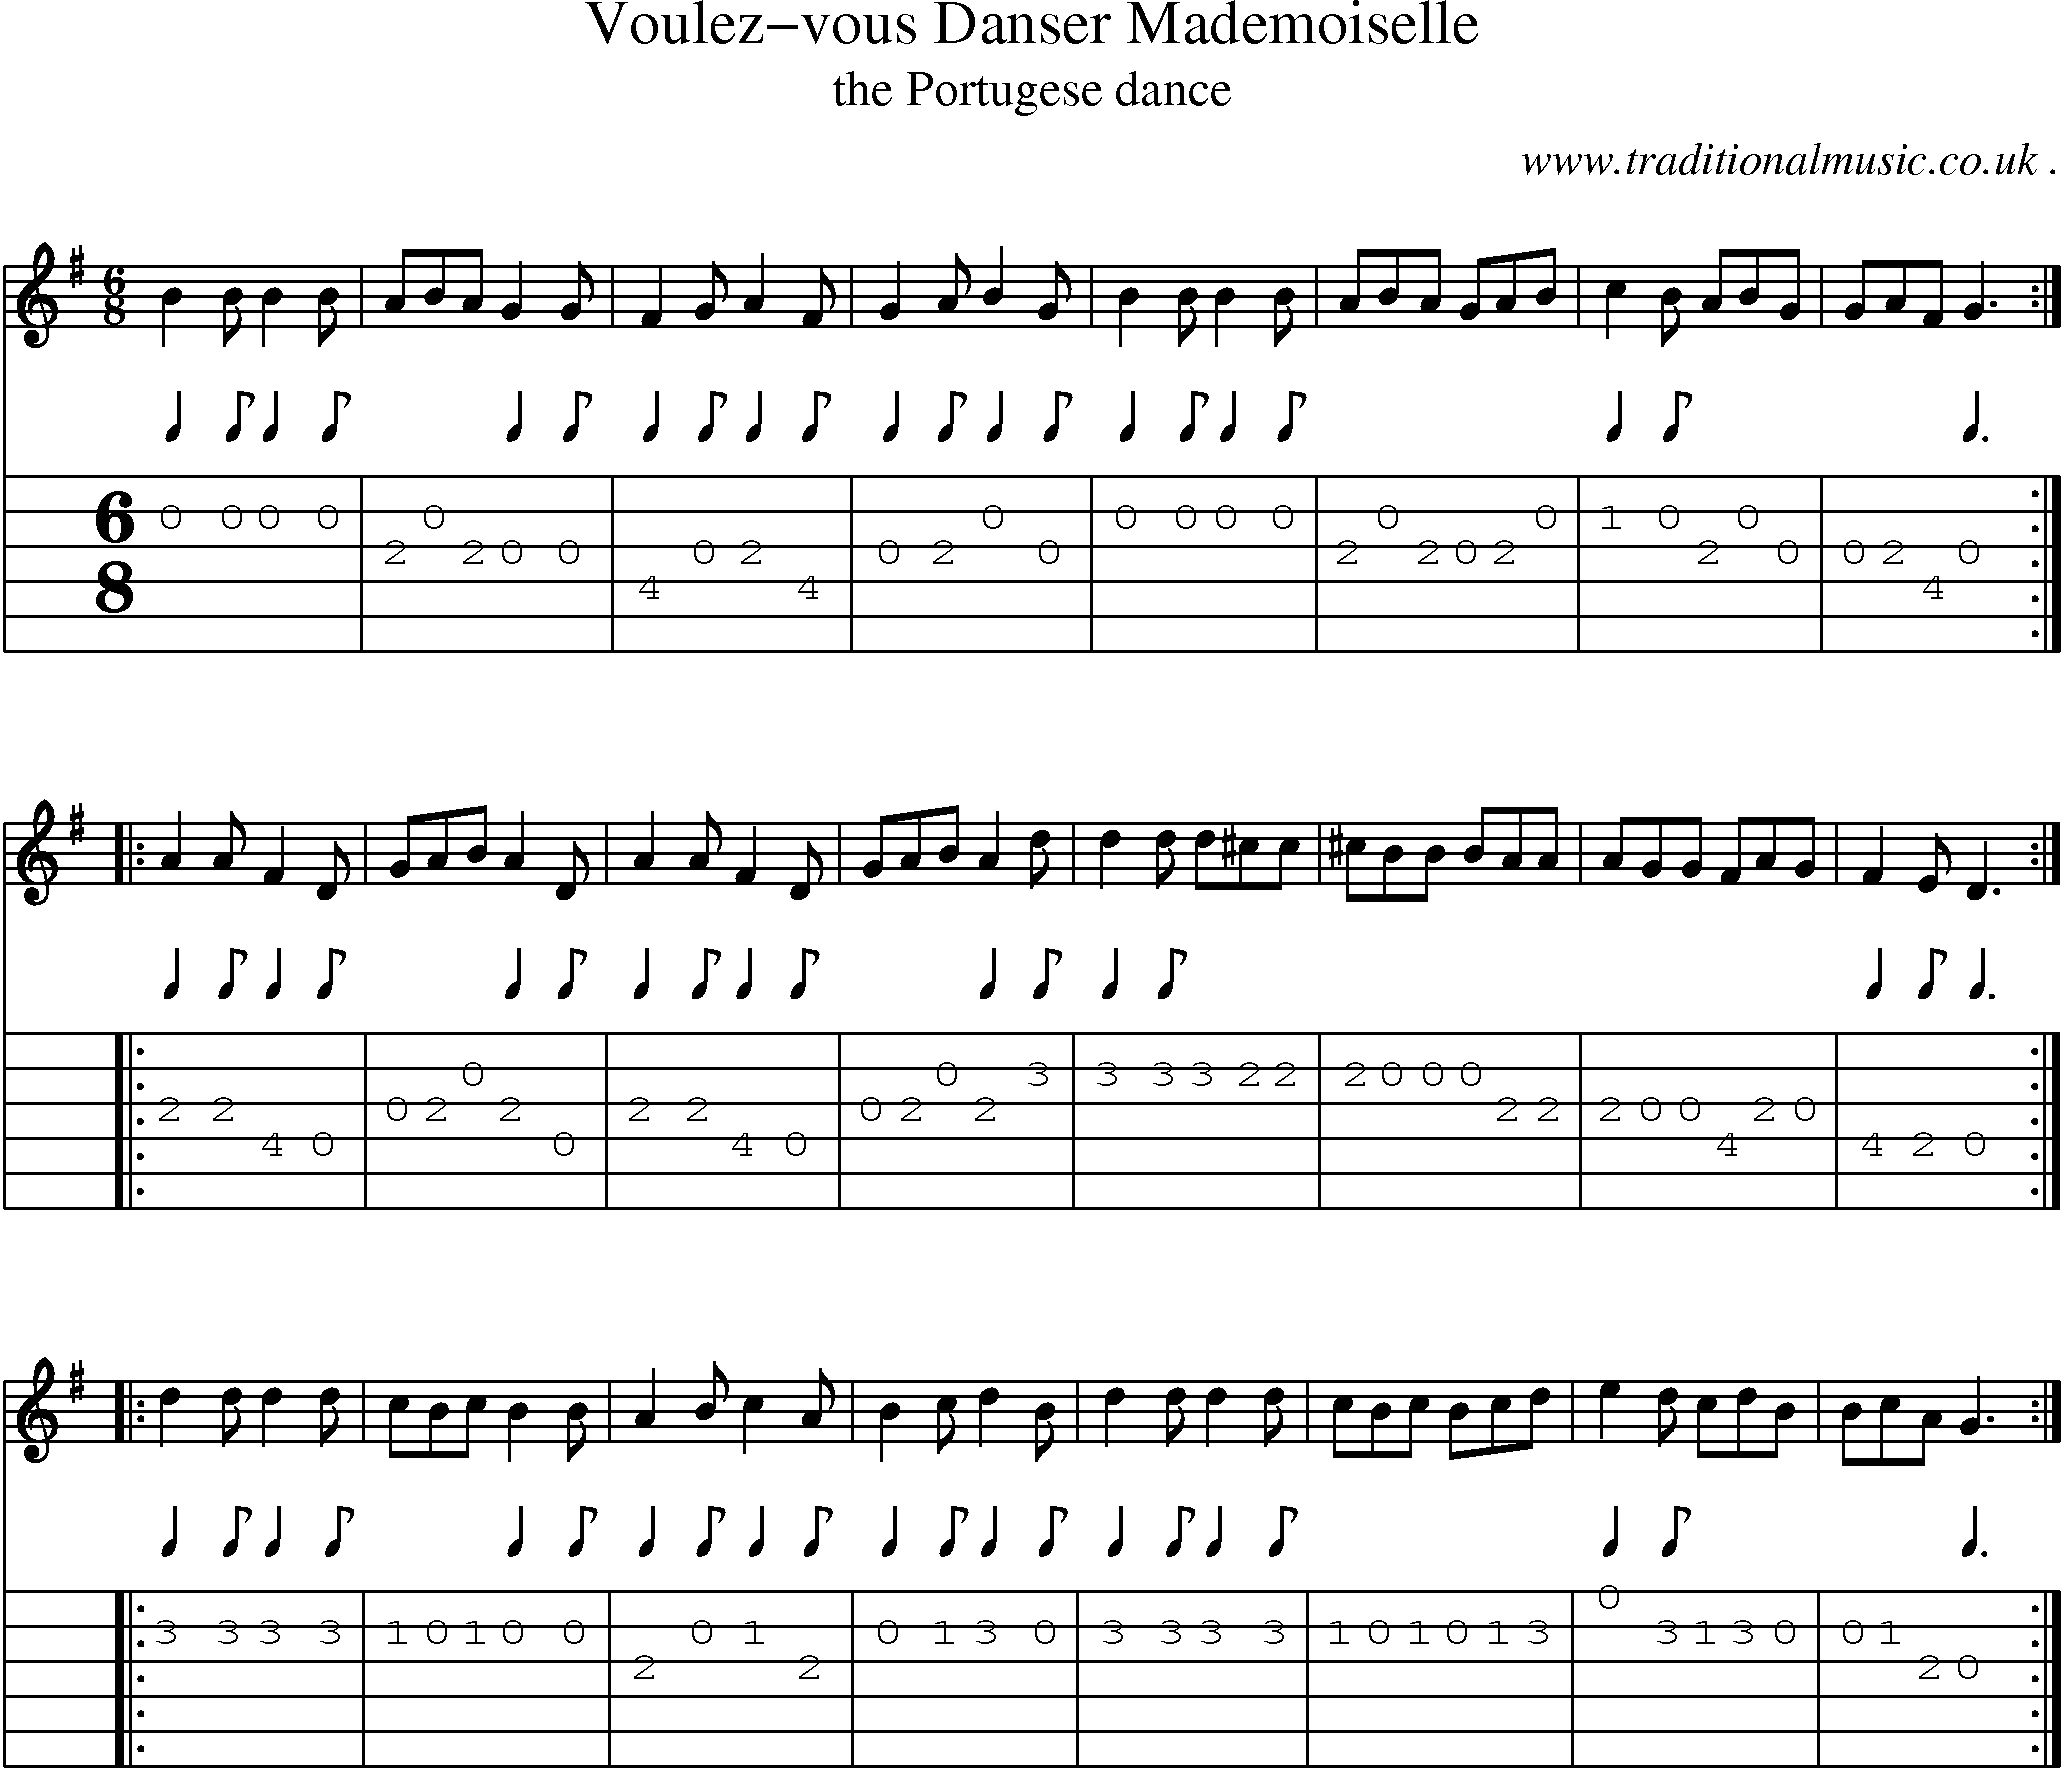 Sheet-Music and Guitar Tabs for Voulez-vous Danser Mademoiselle